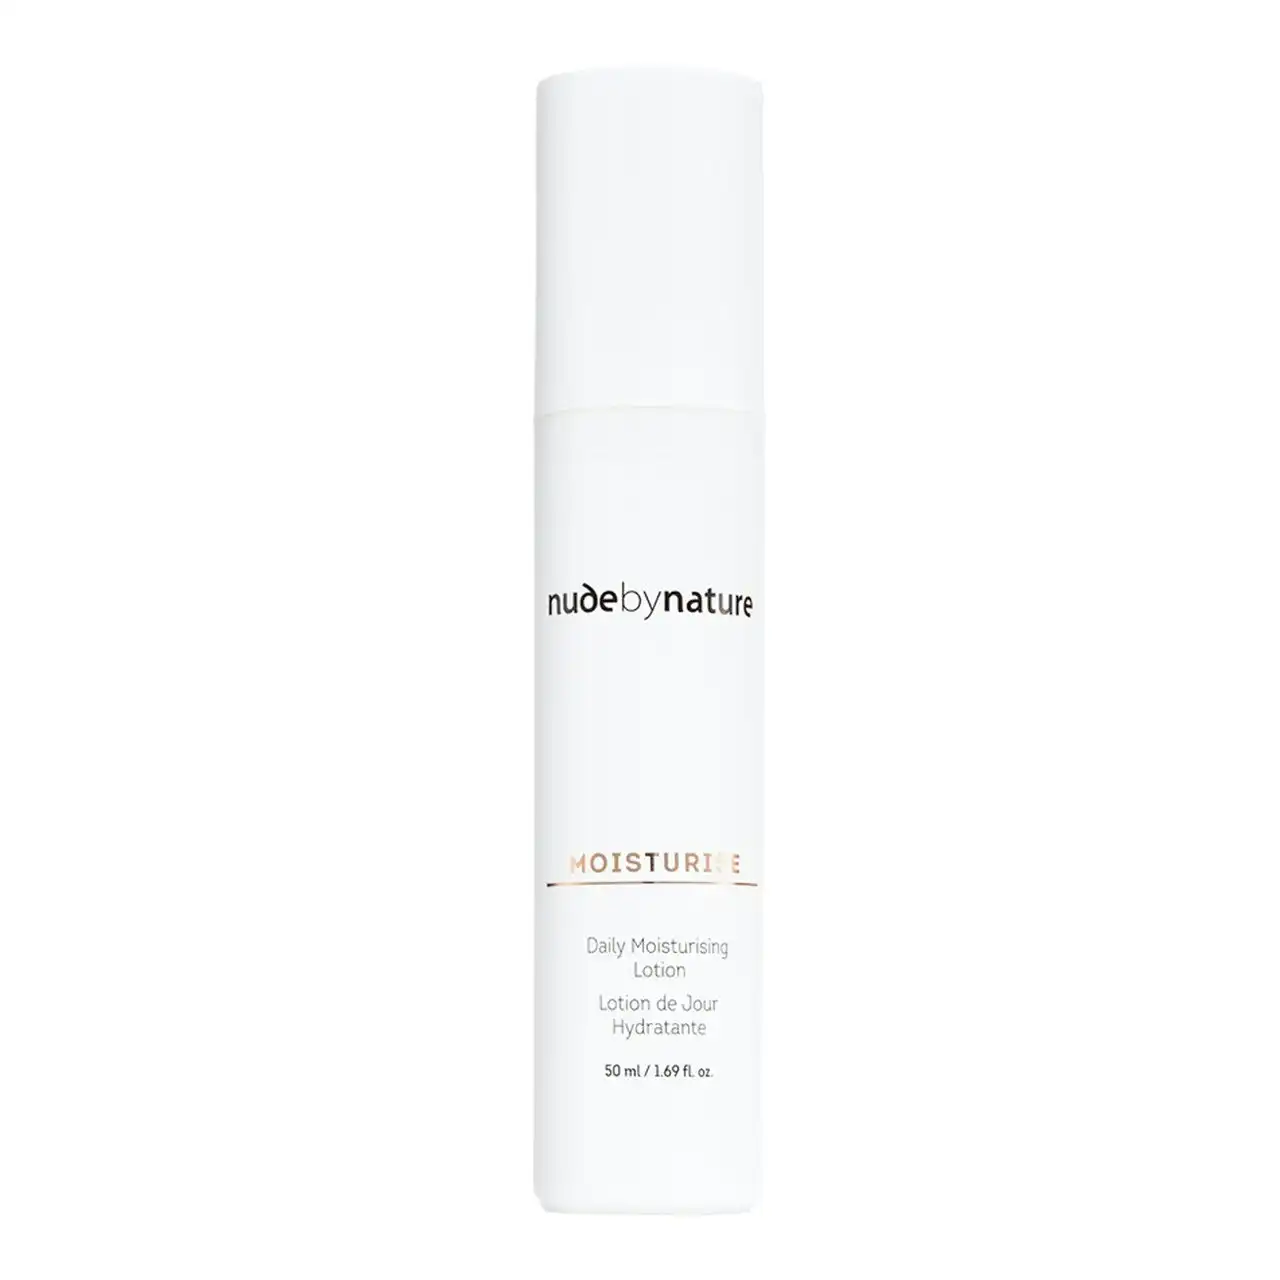 Nude by Nature Daily Moisturising Lotion 50ml